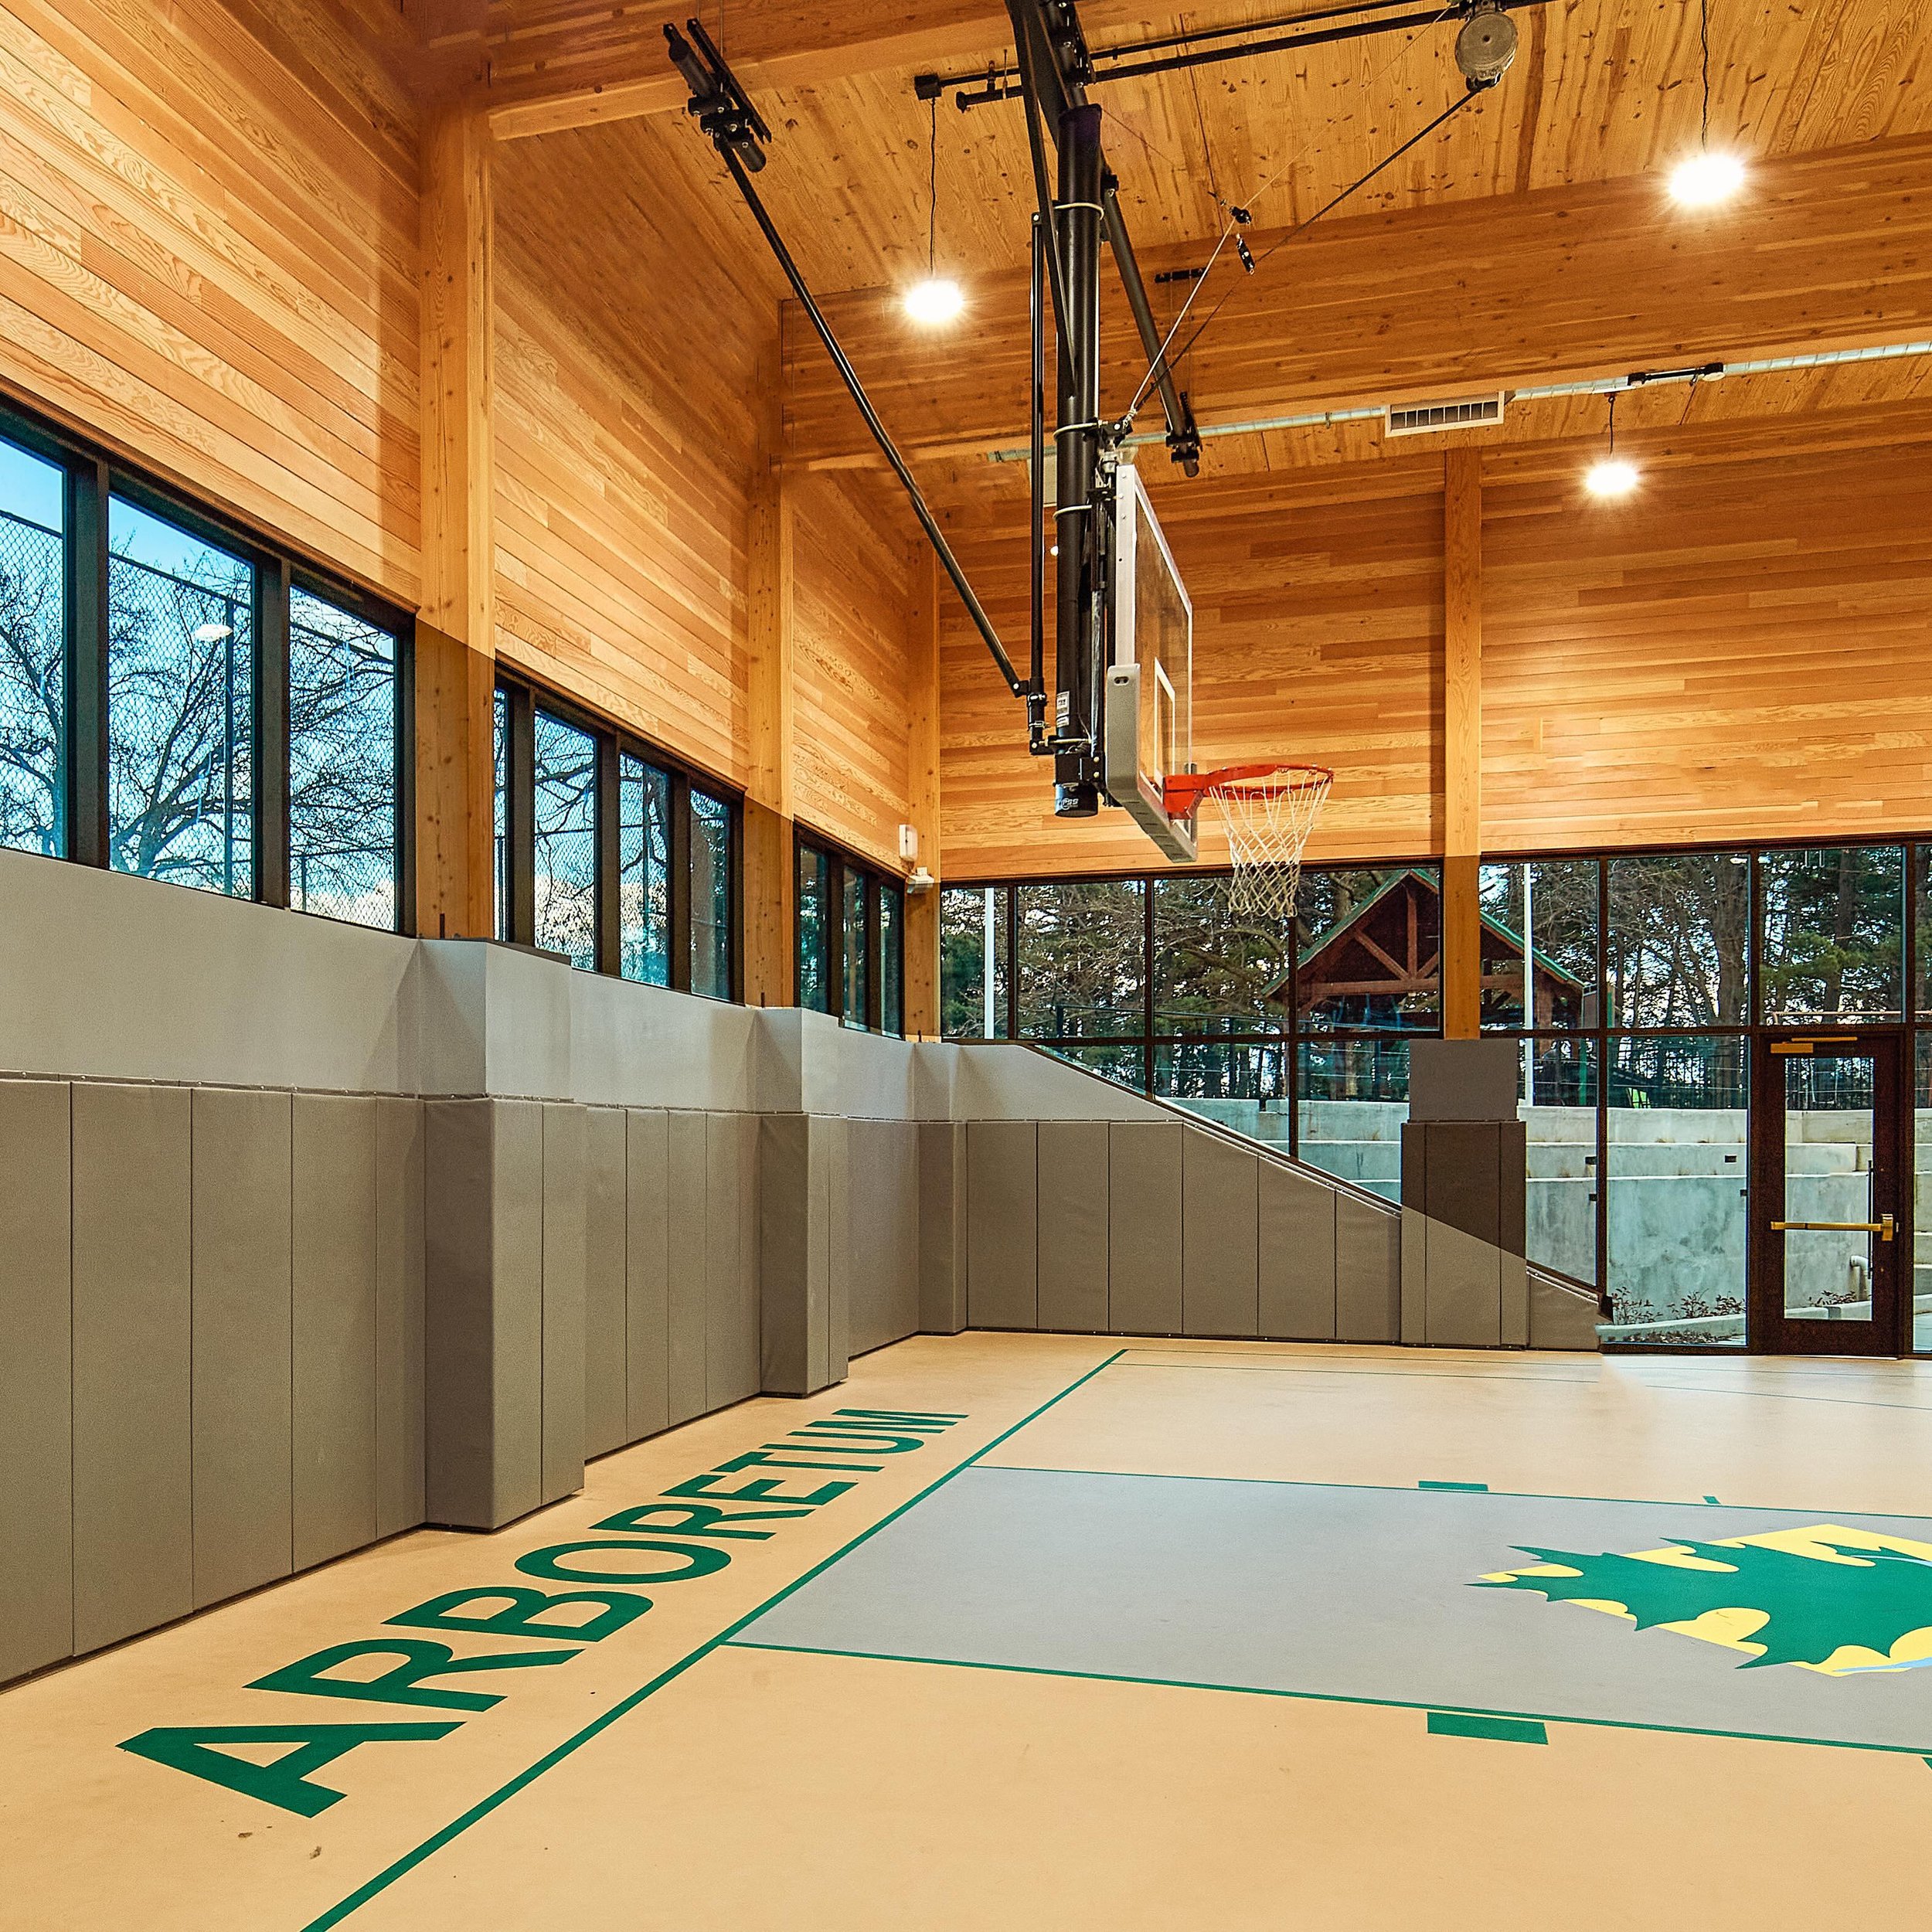 The first Mass Timber community center in the nation&rsquo;s capital is Arboretum Community Center in Northeast Washington DC. 

#first #mass #timber #carbon #footprint #design #wood #architecture #greenbuilding #leed #basketball #bball #recreation #